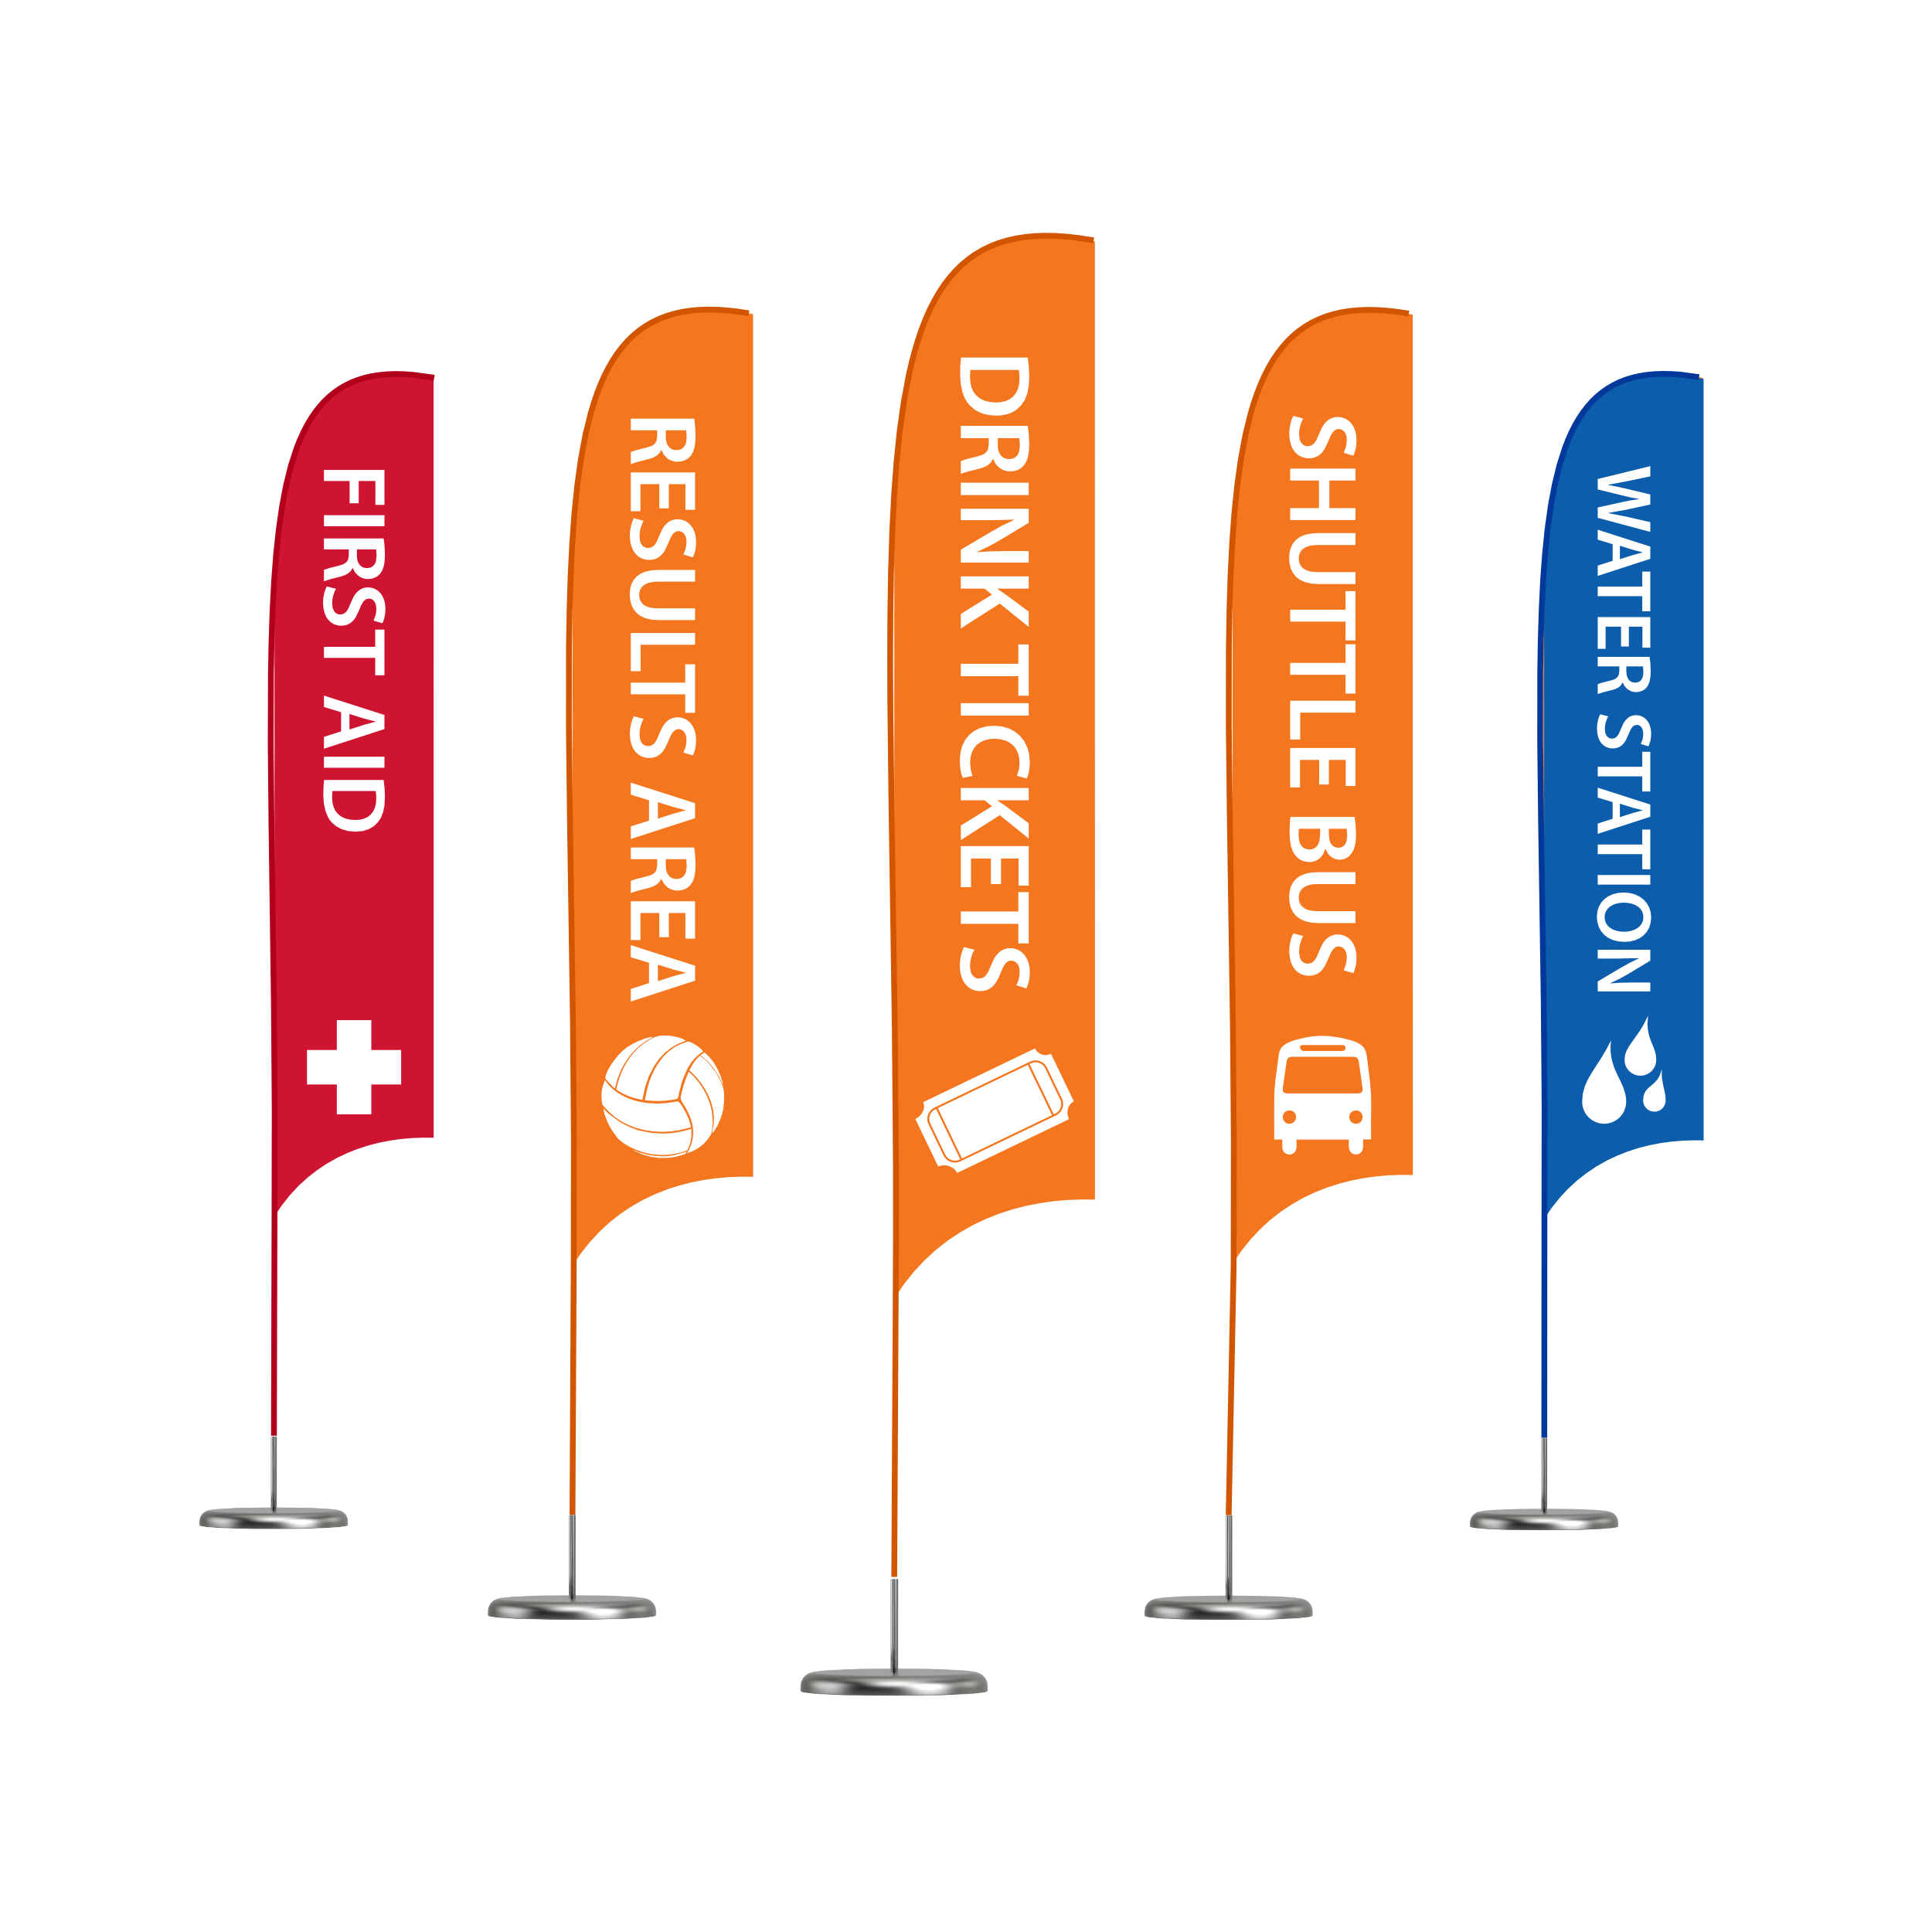 Venue flags designed to identify on-site resources like first aid, drink tickets, shuttle bus stop, or water stations.